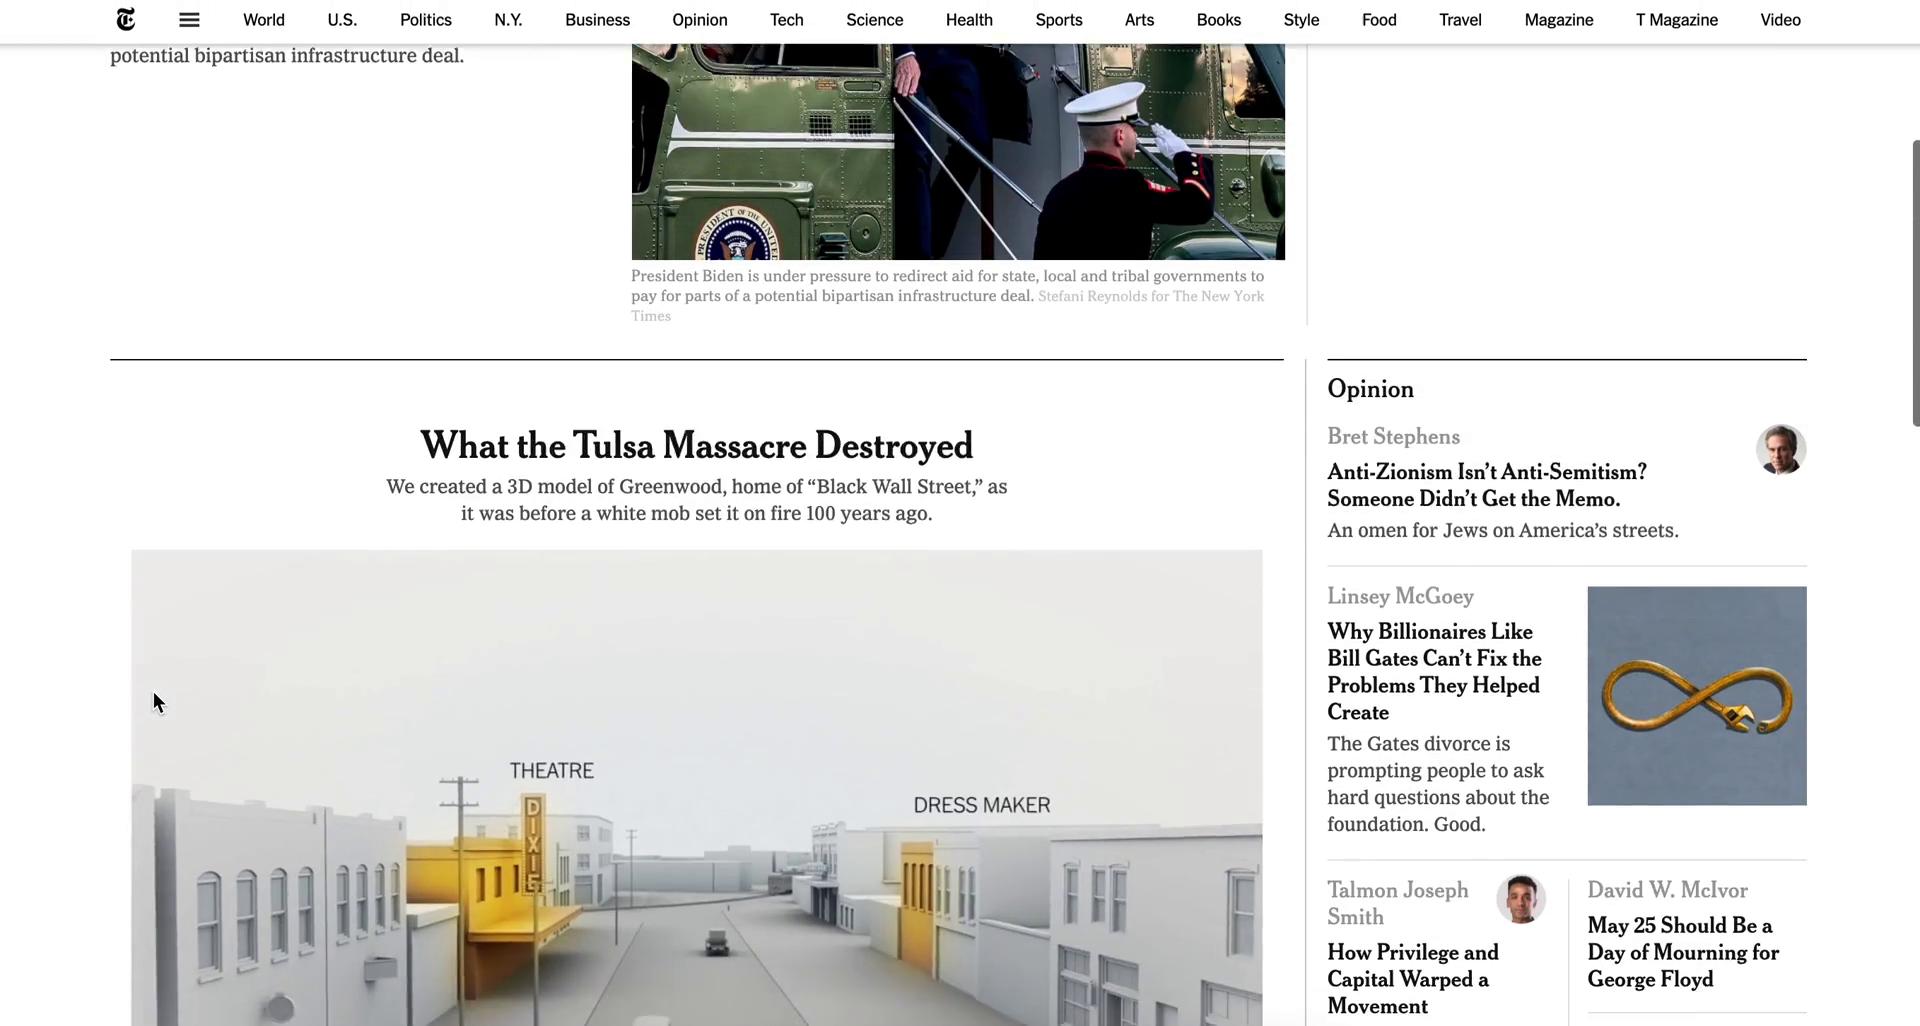 Screenshot of Onboarding on The New York Times